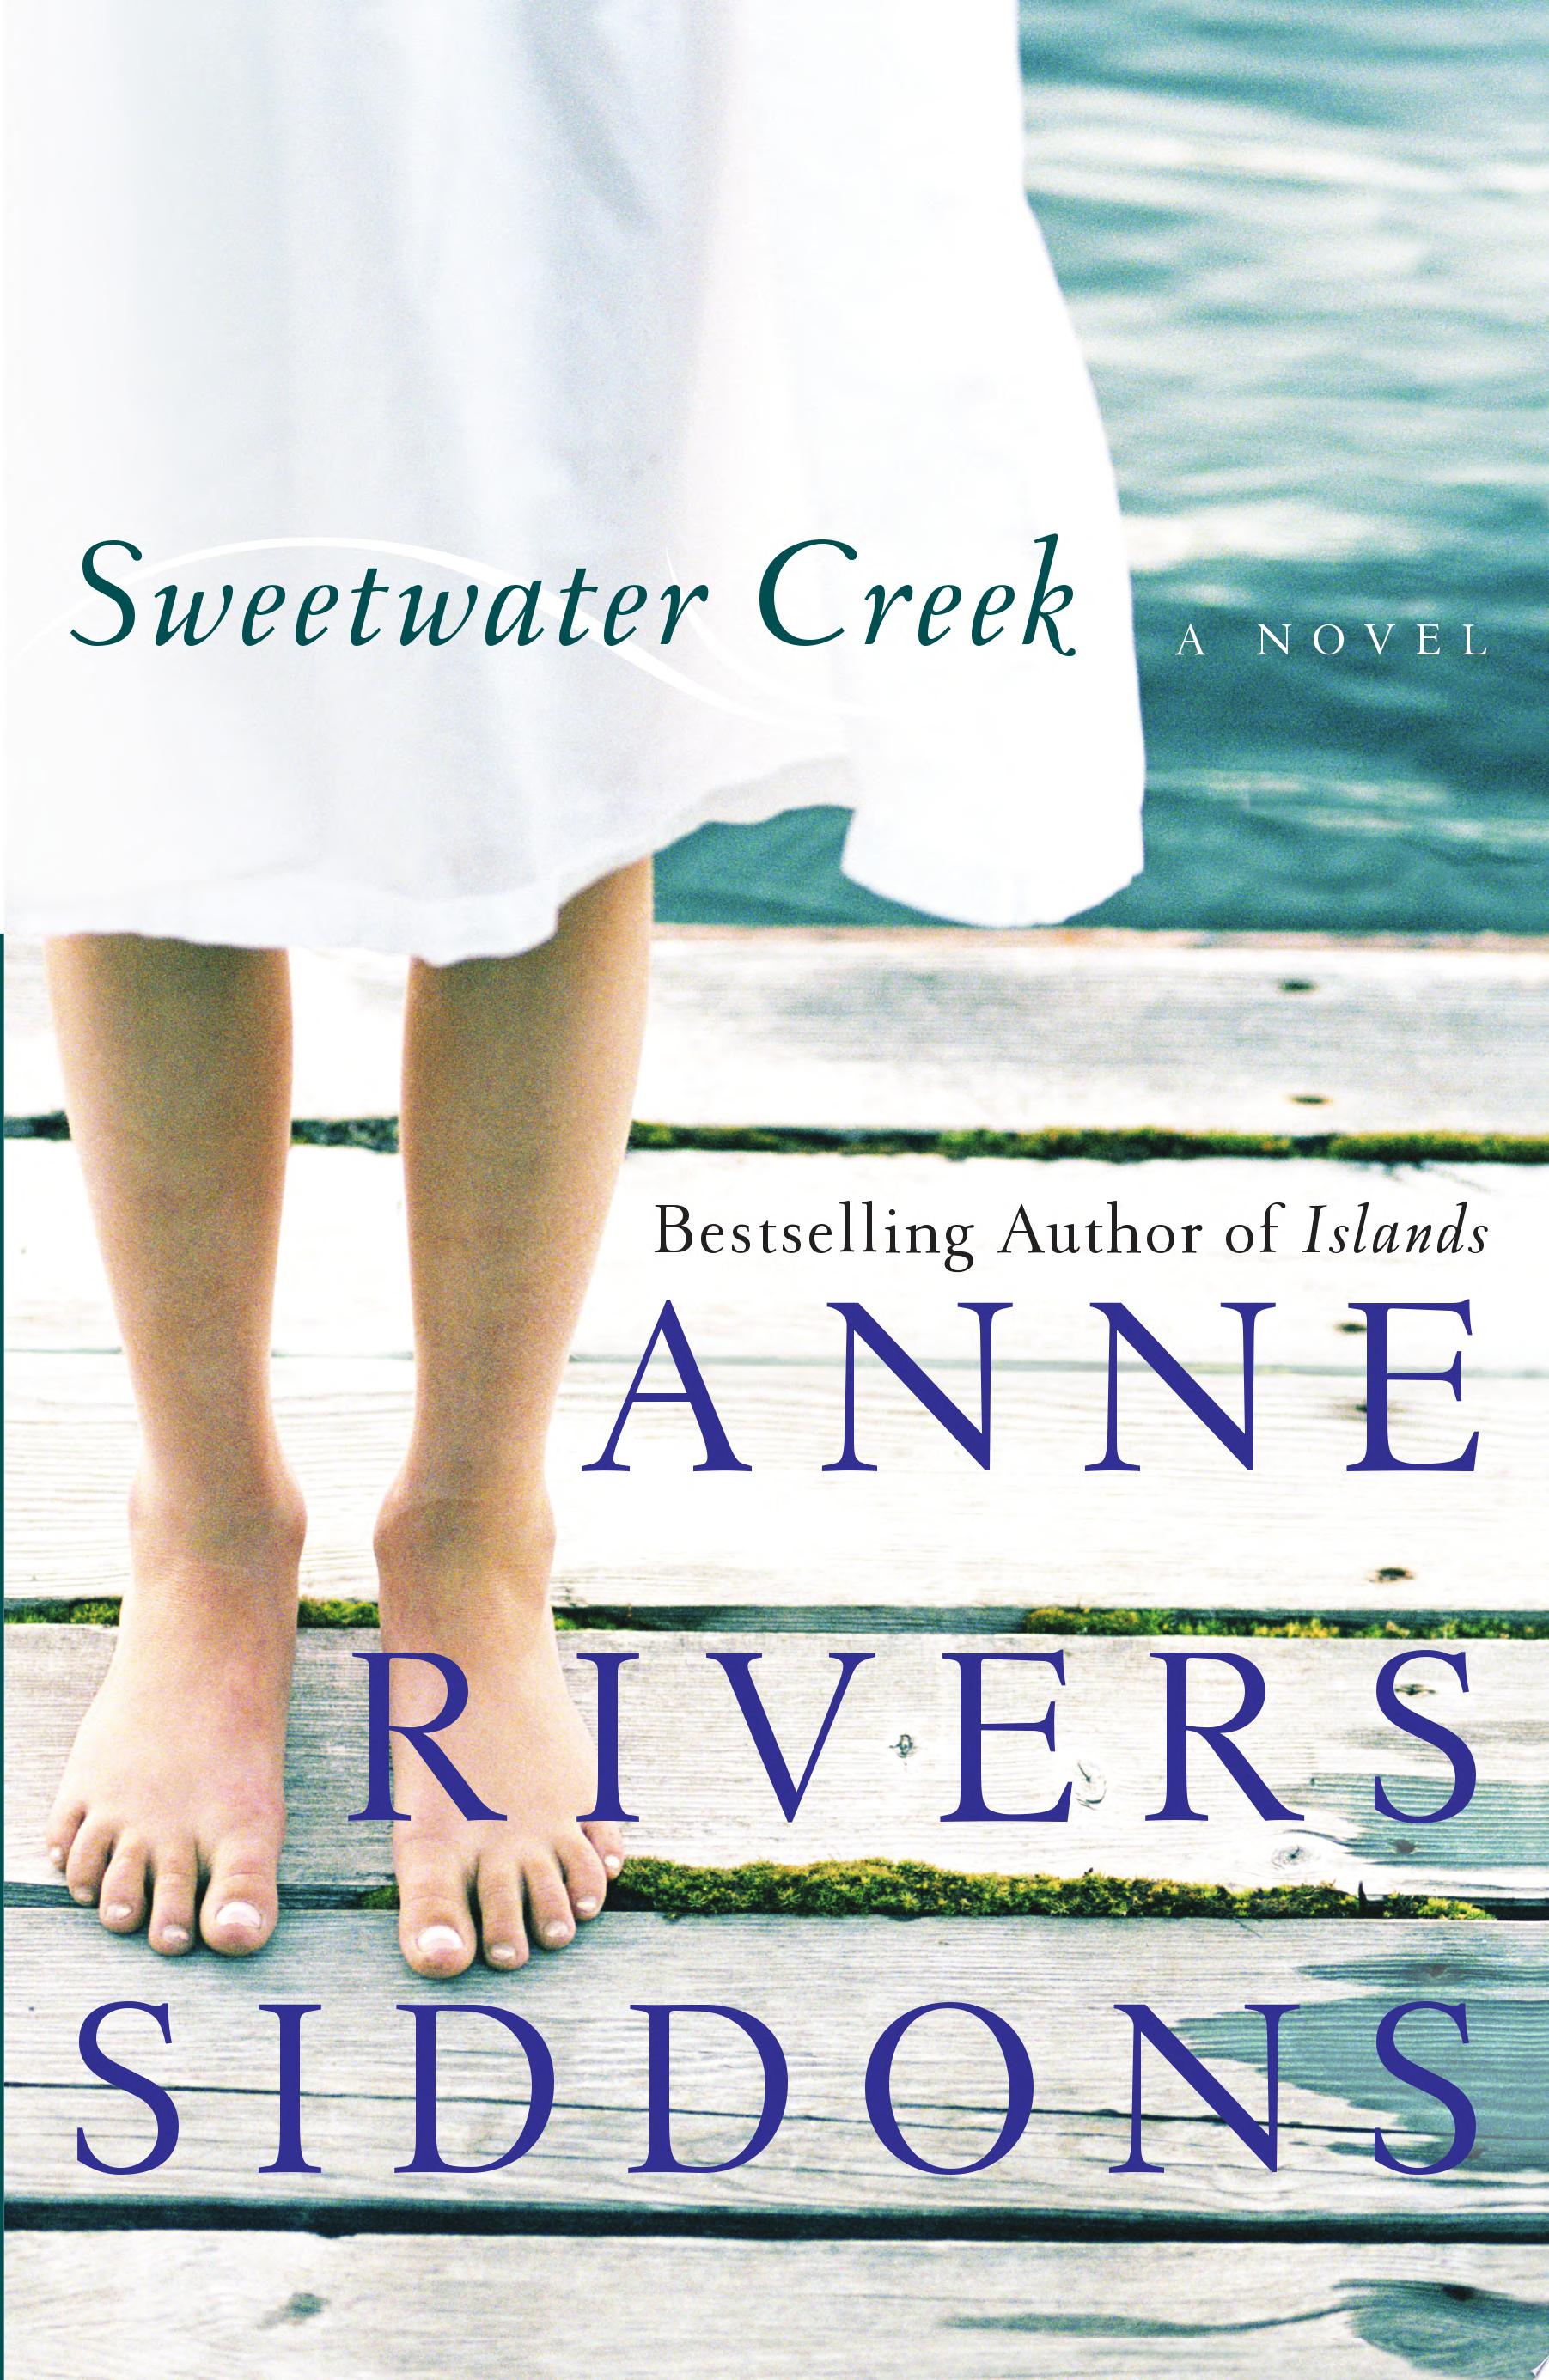 Image for "Sweetwater Creek"